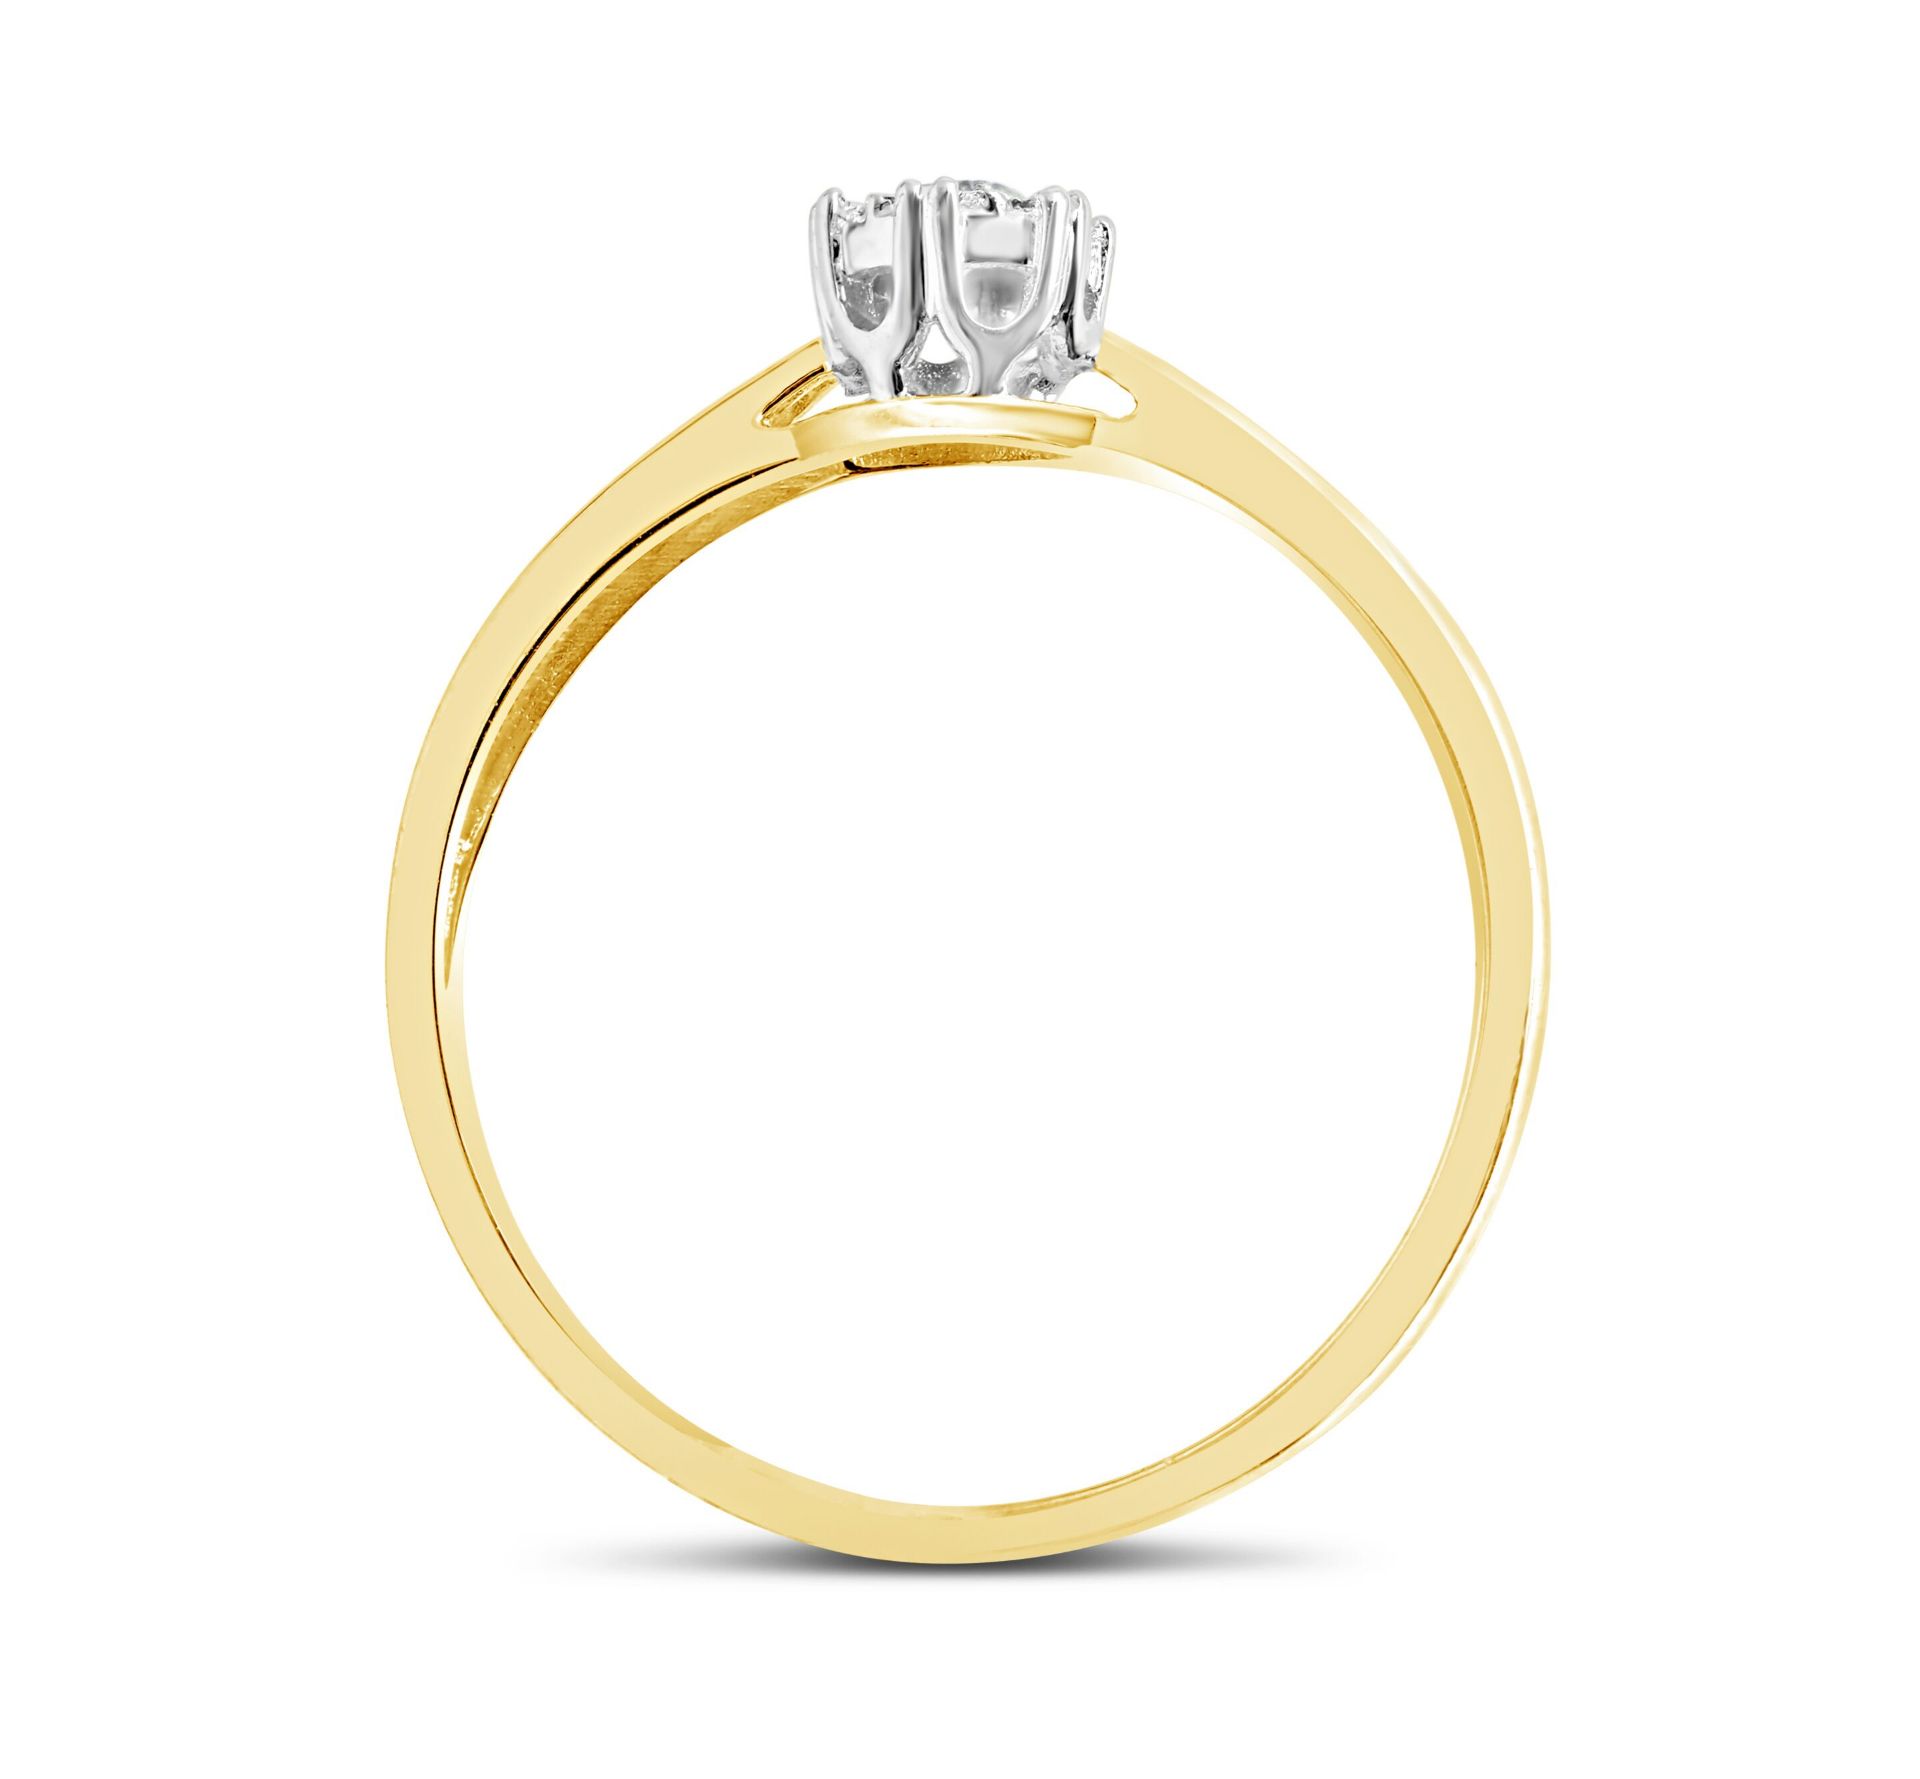 Yellow Gold Diamond Solitaire Ring, Metal 9ct Yell - Image 3 of 4